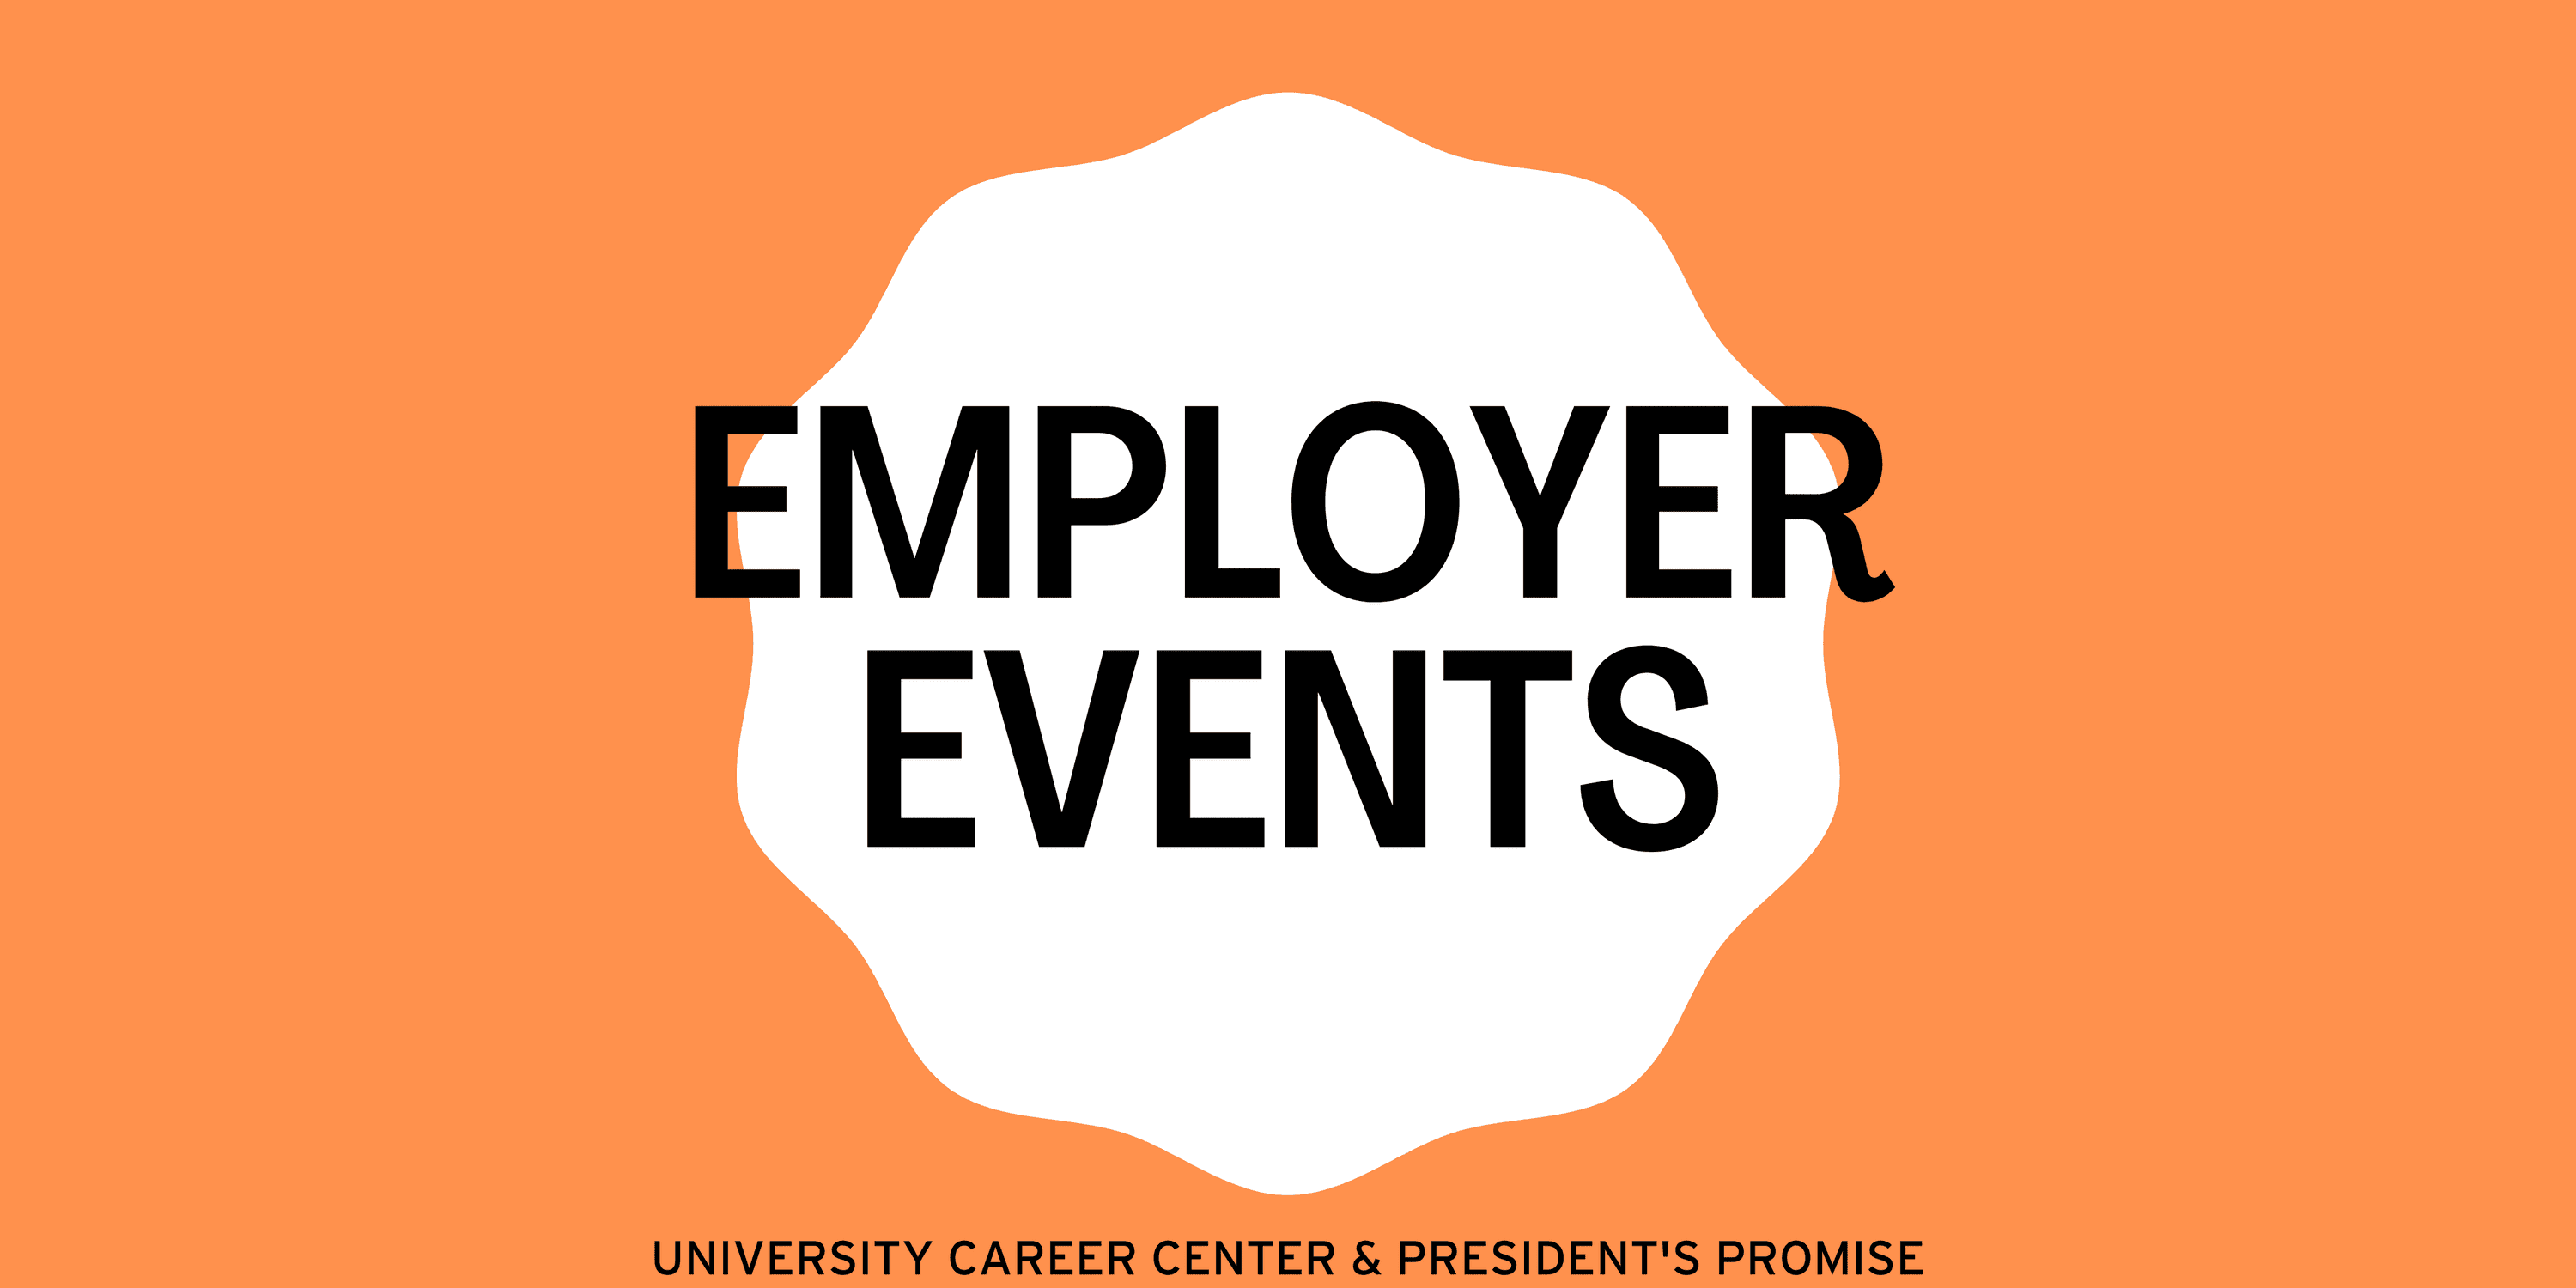 Promotional image with orange background. Has a white cloud shaped circle with the words "Employer Events" in the middle.